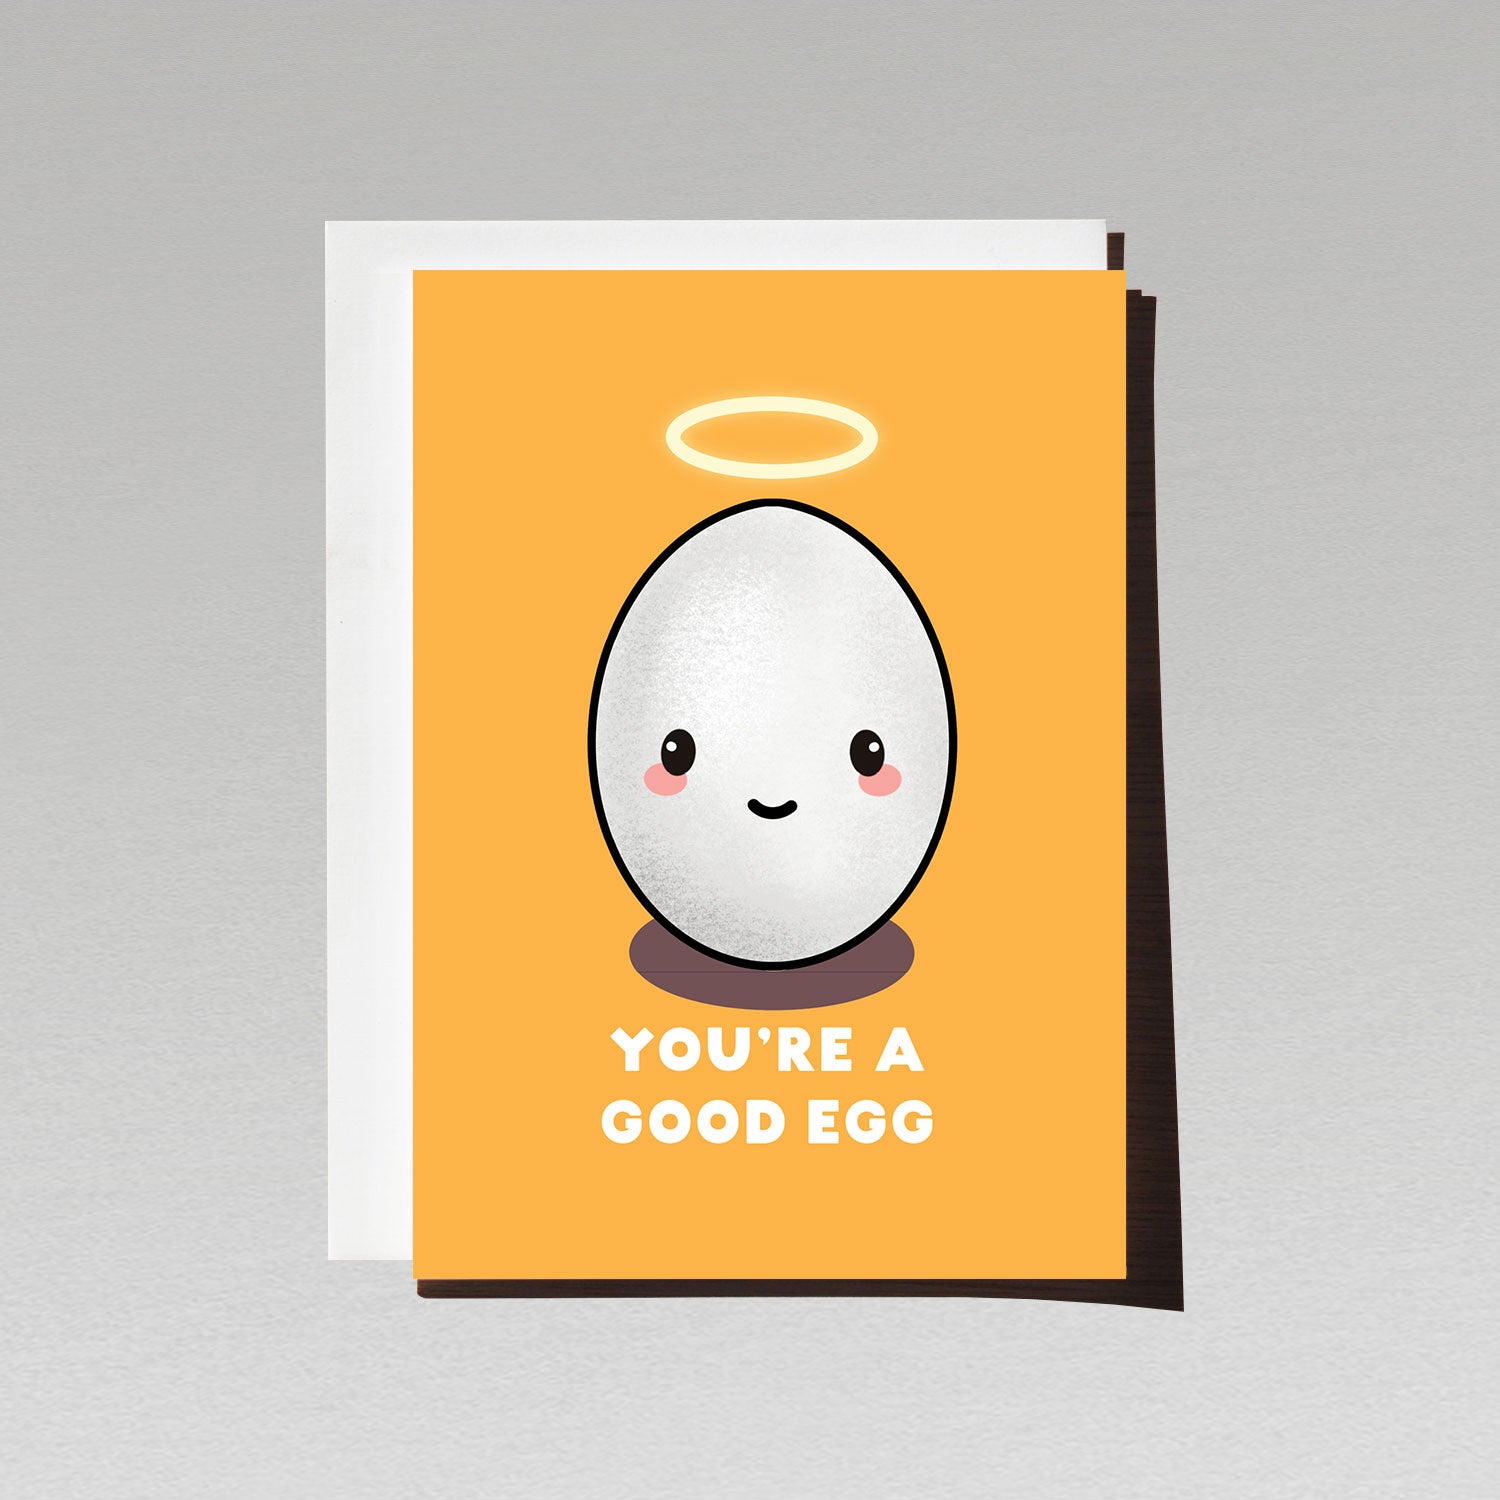 Greeting card with cute smiling white egg character with angel halo on orange background with text You're a good egg